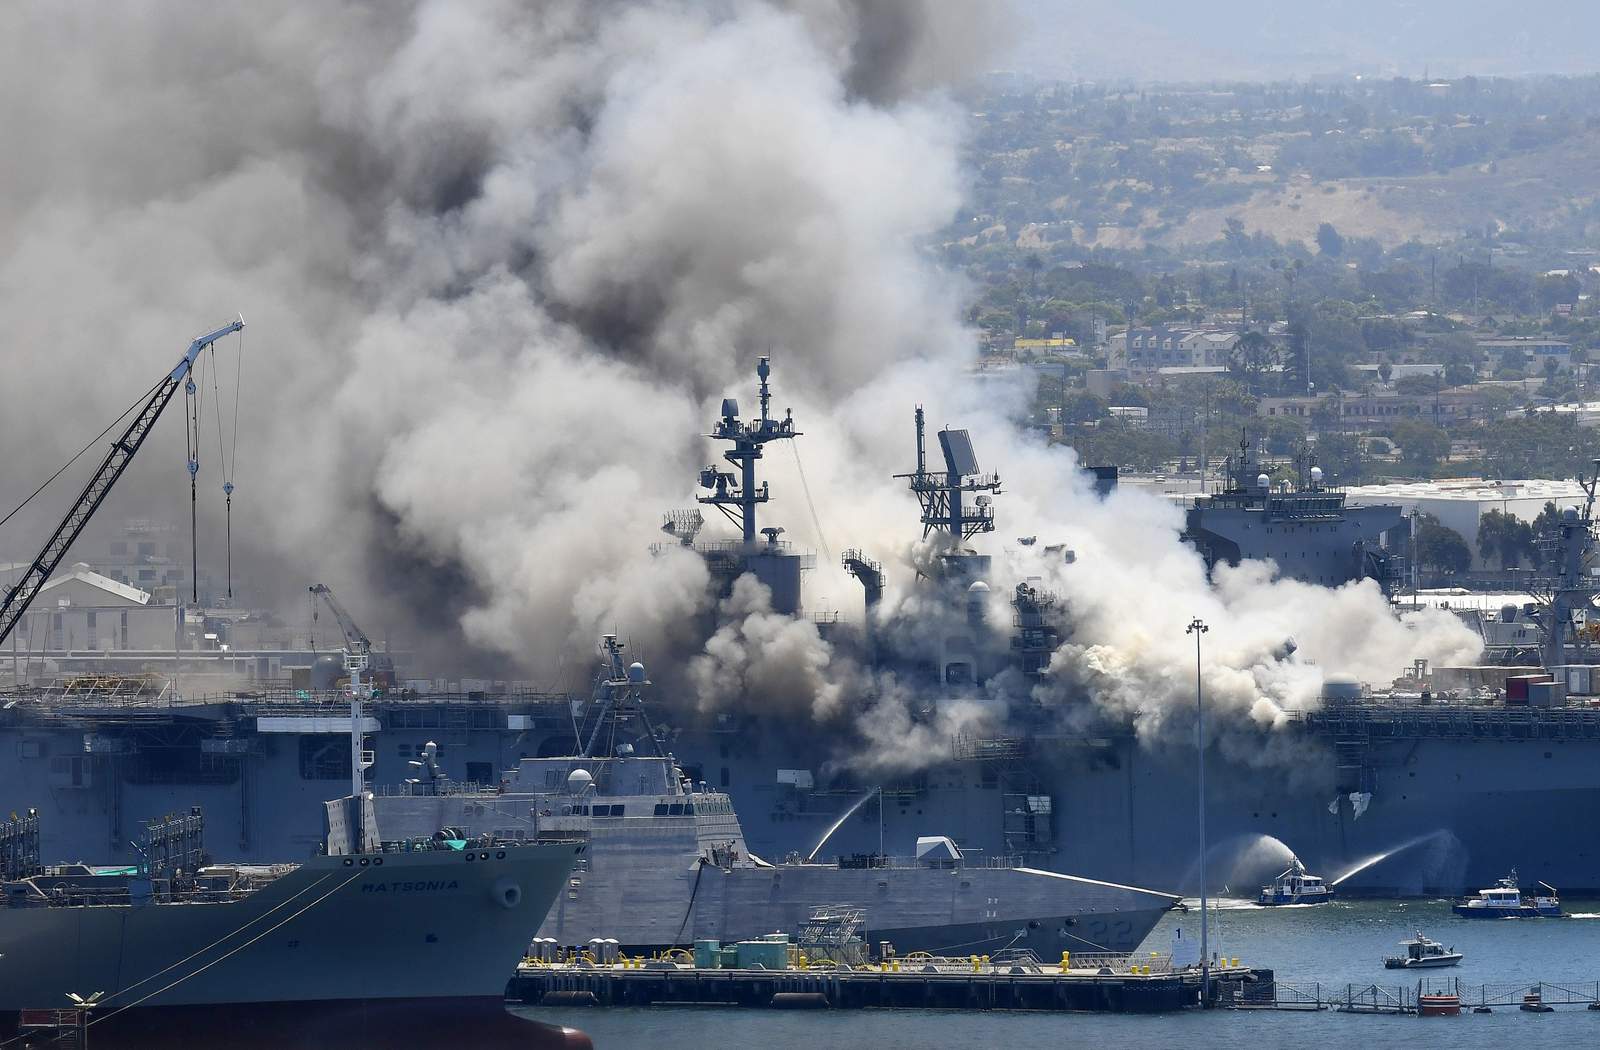 Defense official: Arson suspected as cause of Navy ship fire